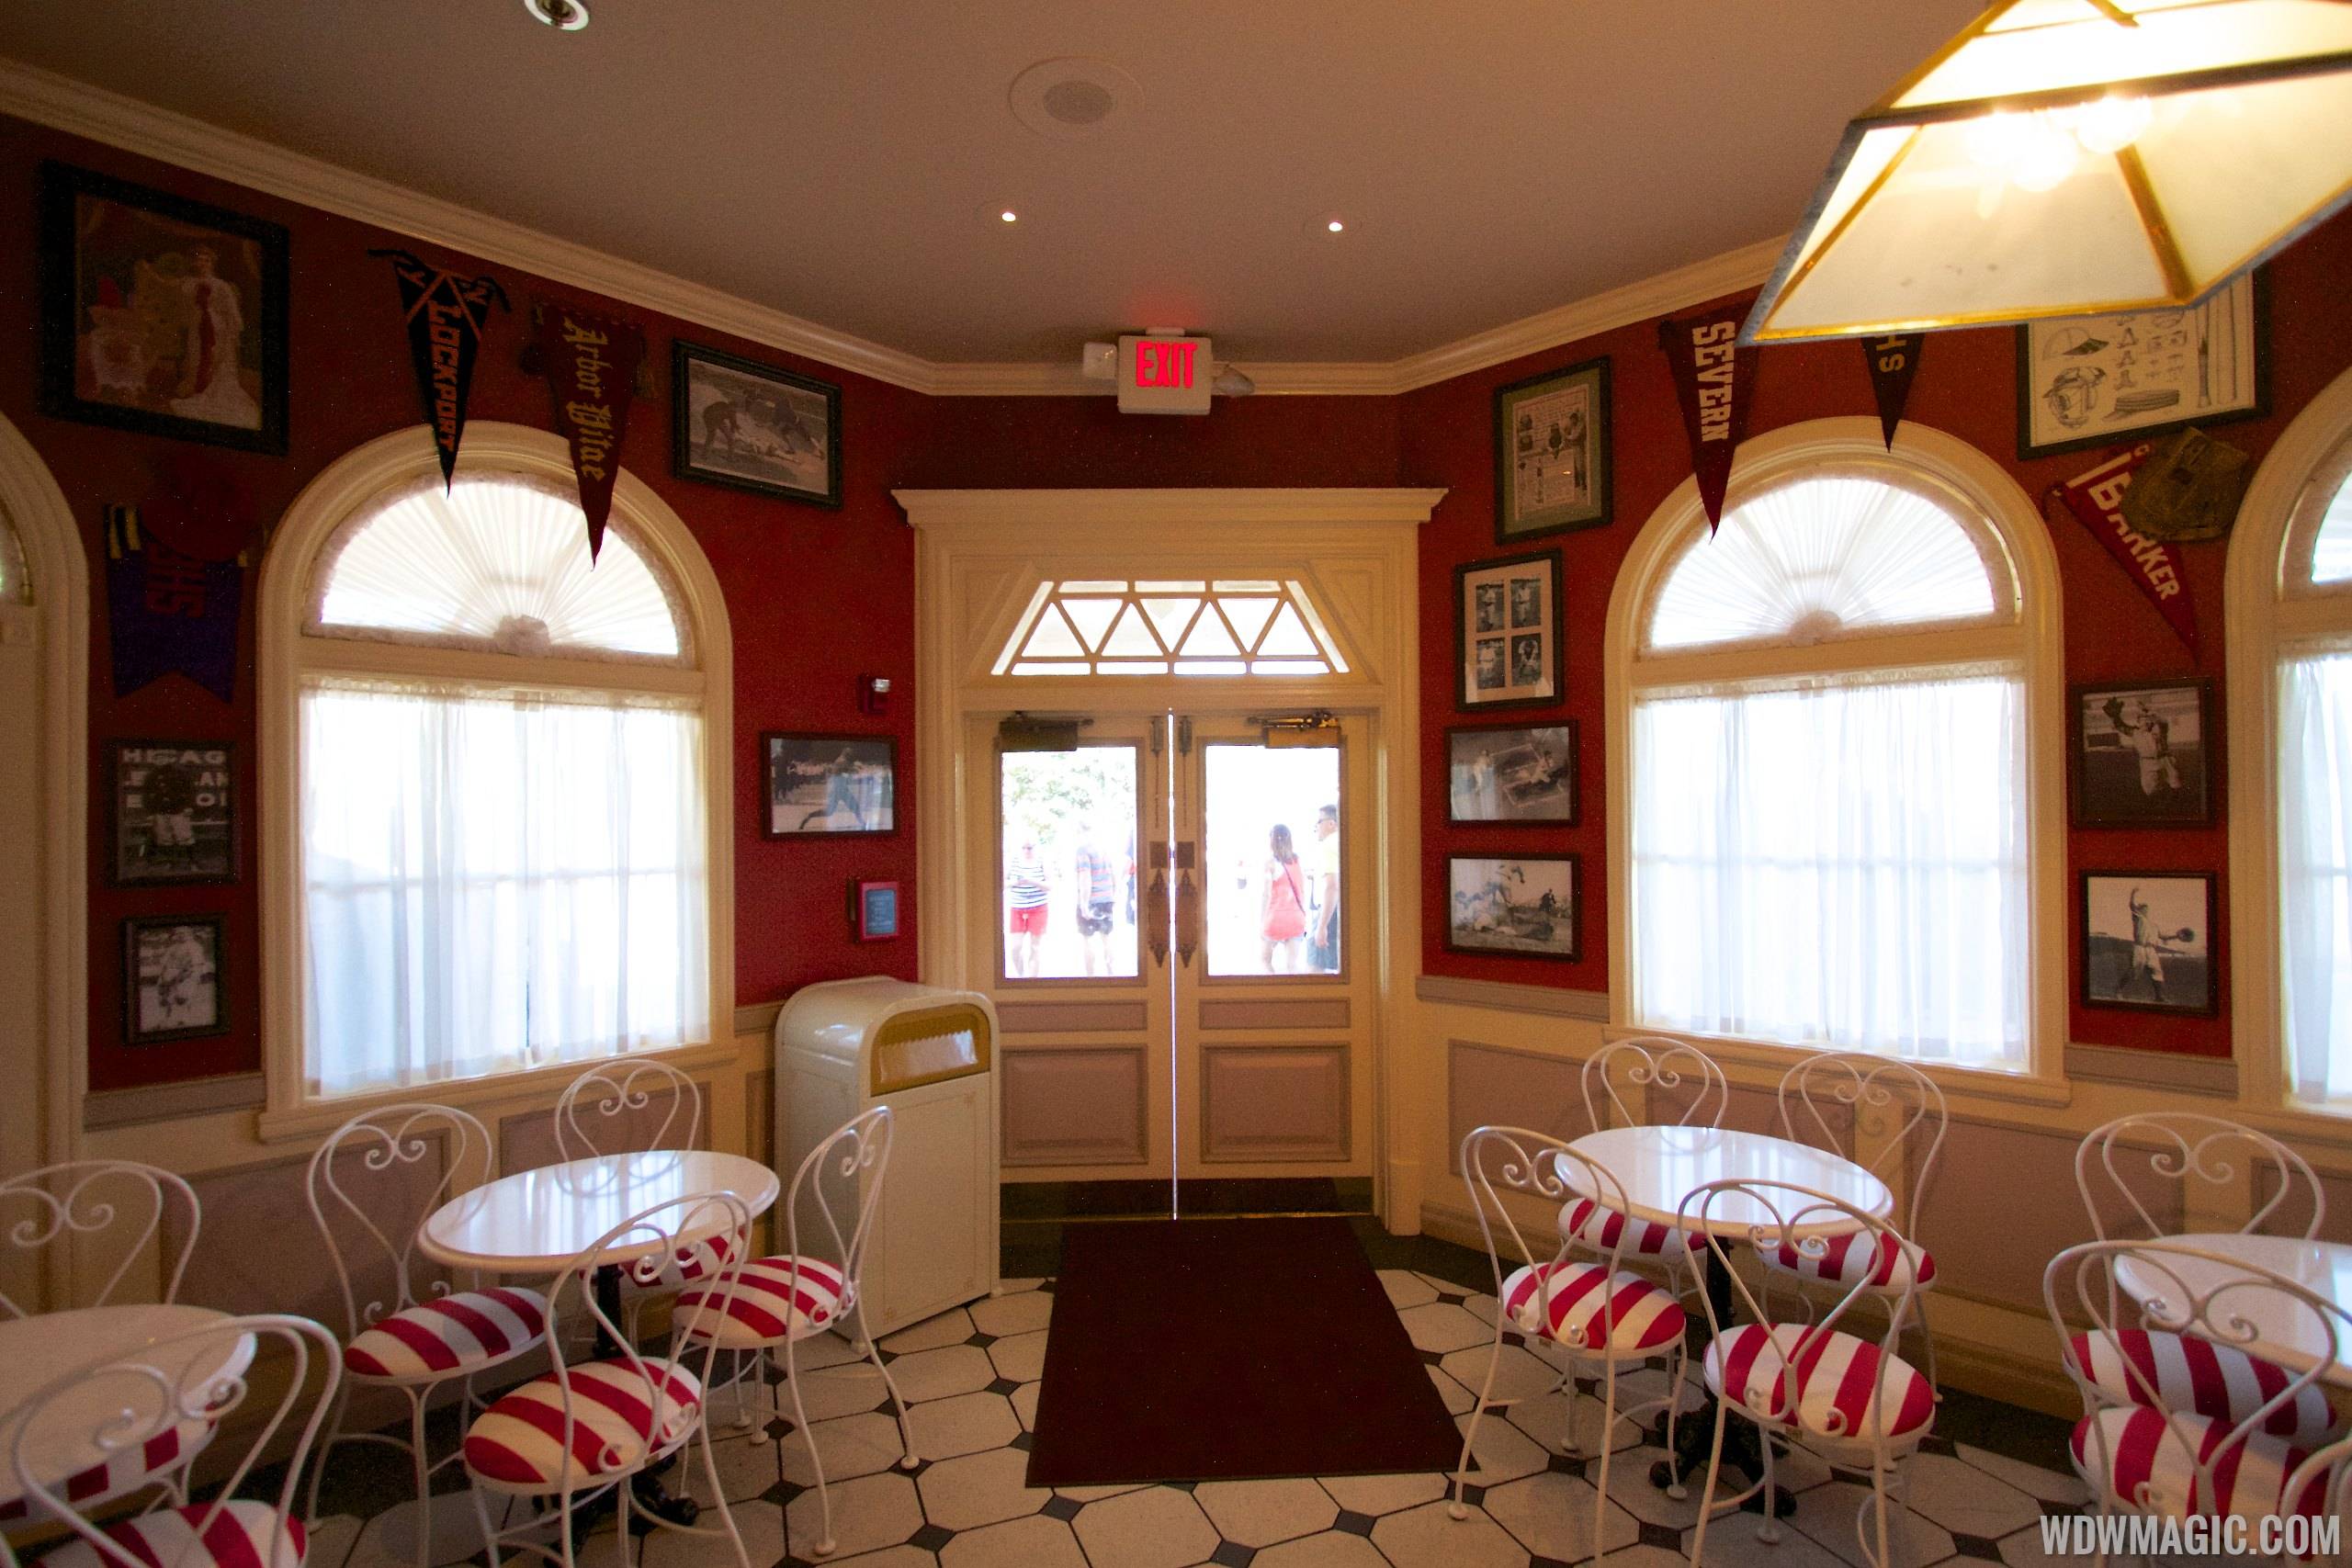 PHOTOS - Casey's Corner to reopen with expanded indoor seating area